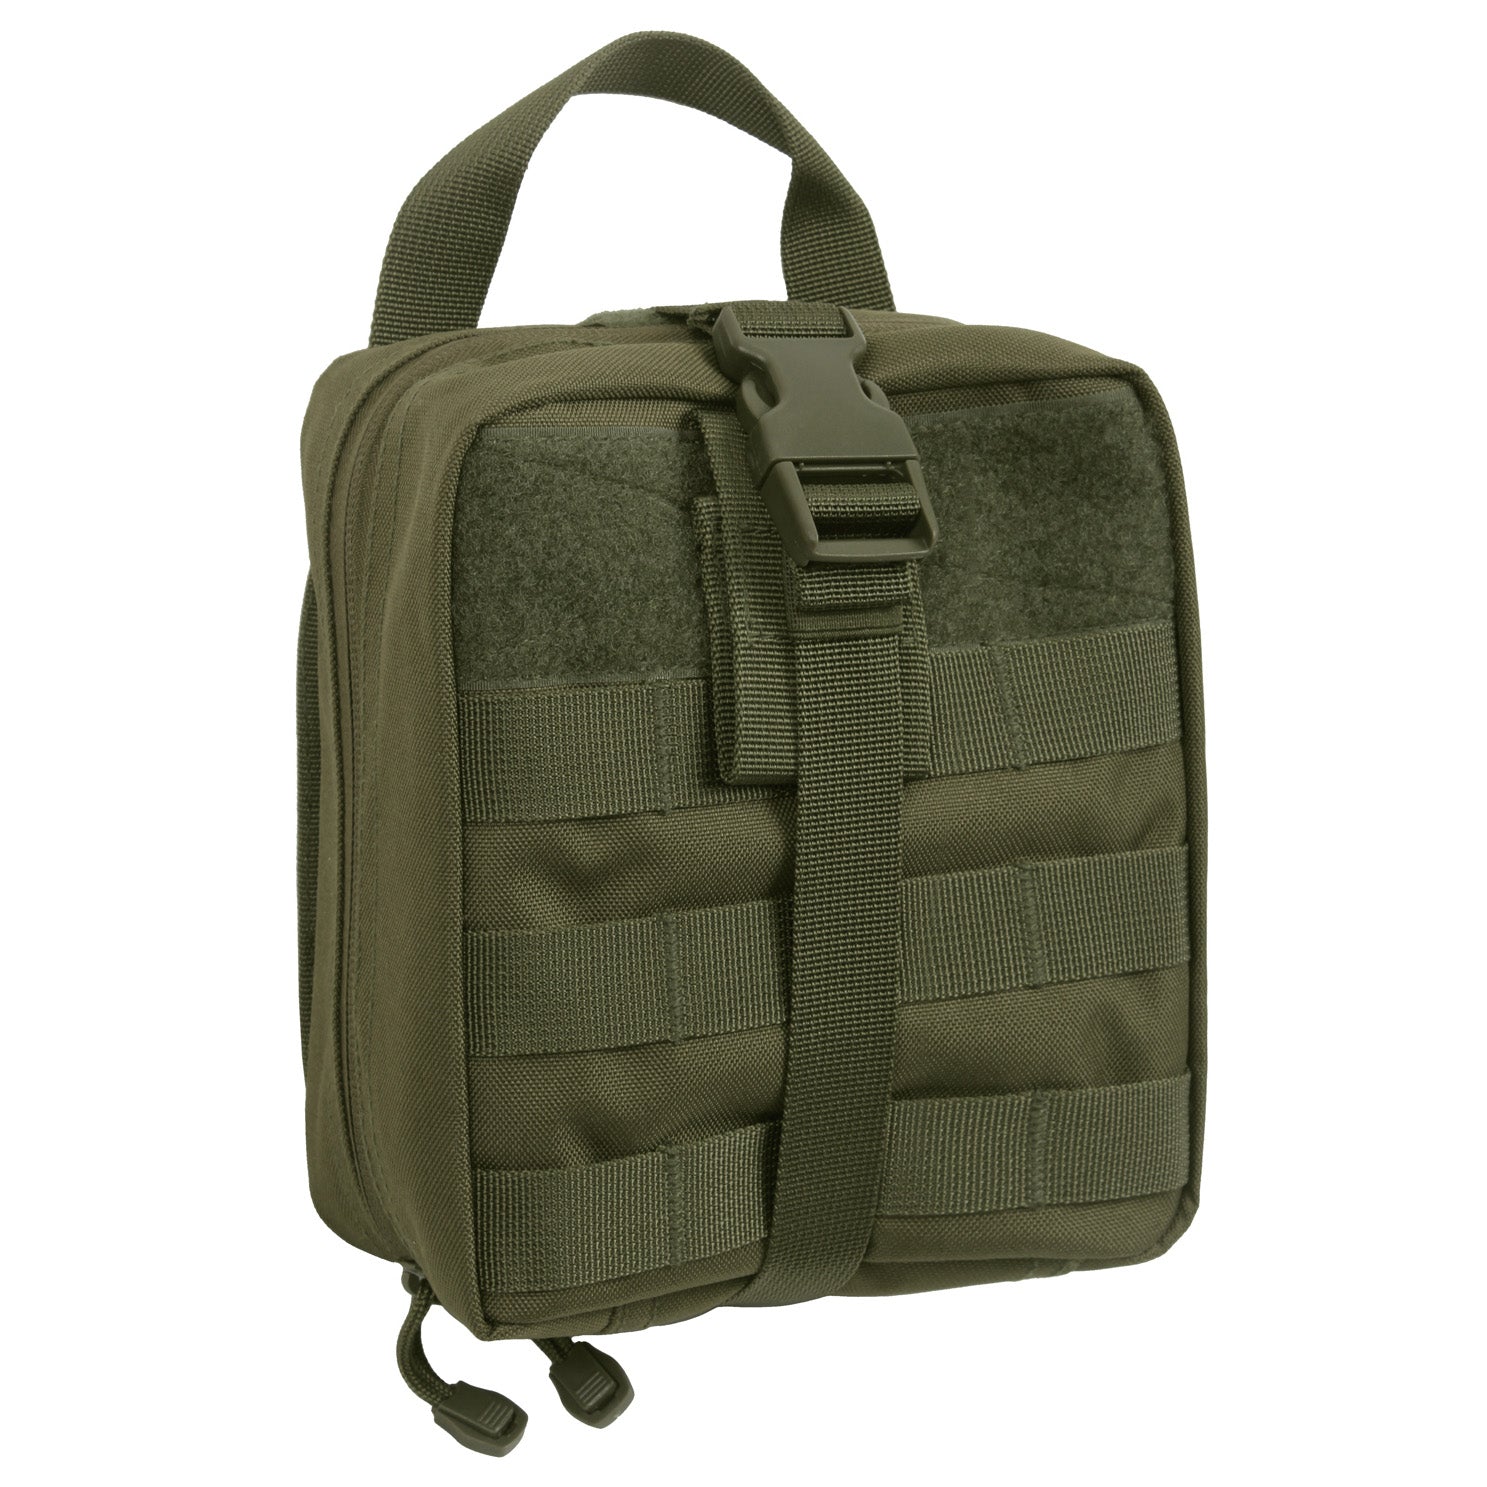 Milspec Tactical Breakaway First Aid Kit First Aid and First Responder Gear MilTac Tactical Military Outdoor Gear Australia